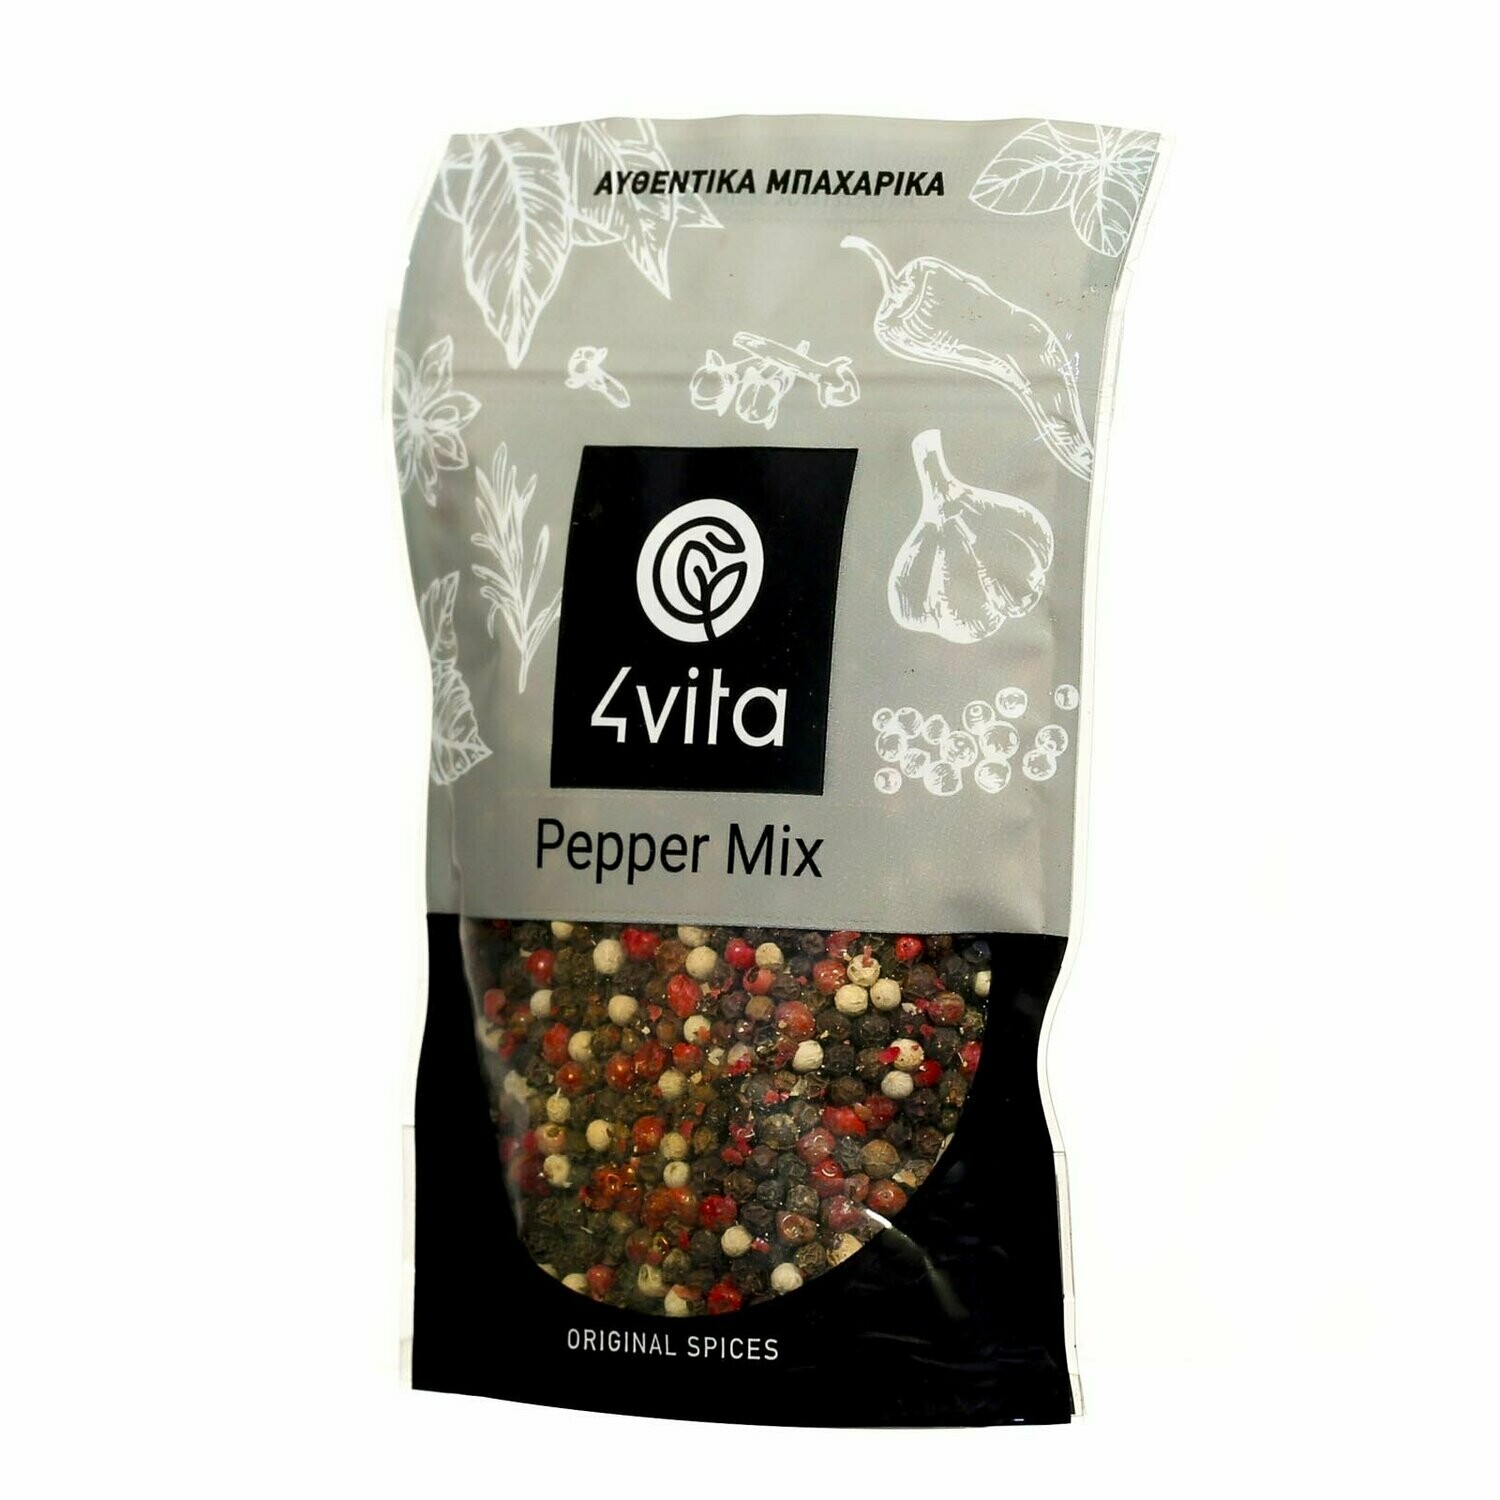 Whole Mixed Dried Peppercorns 70g